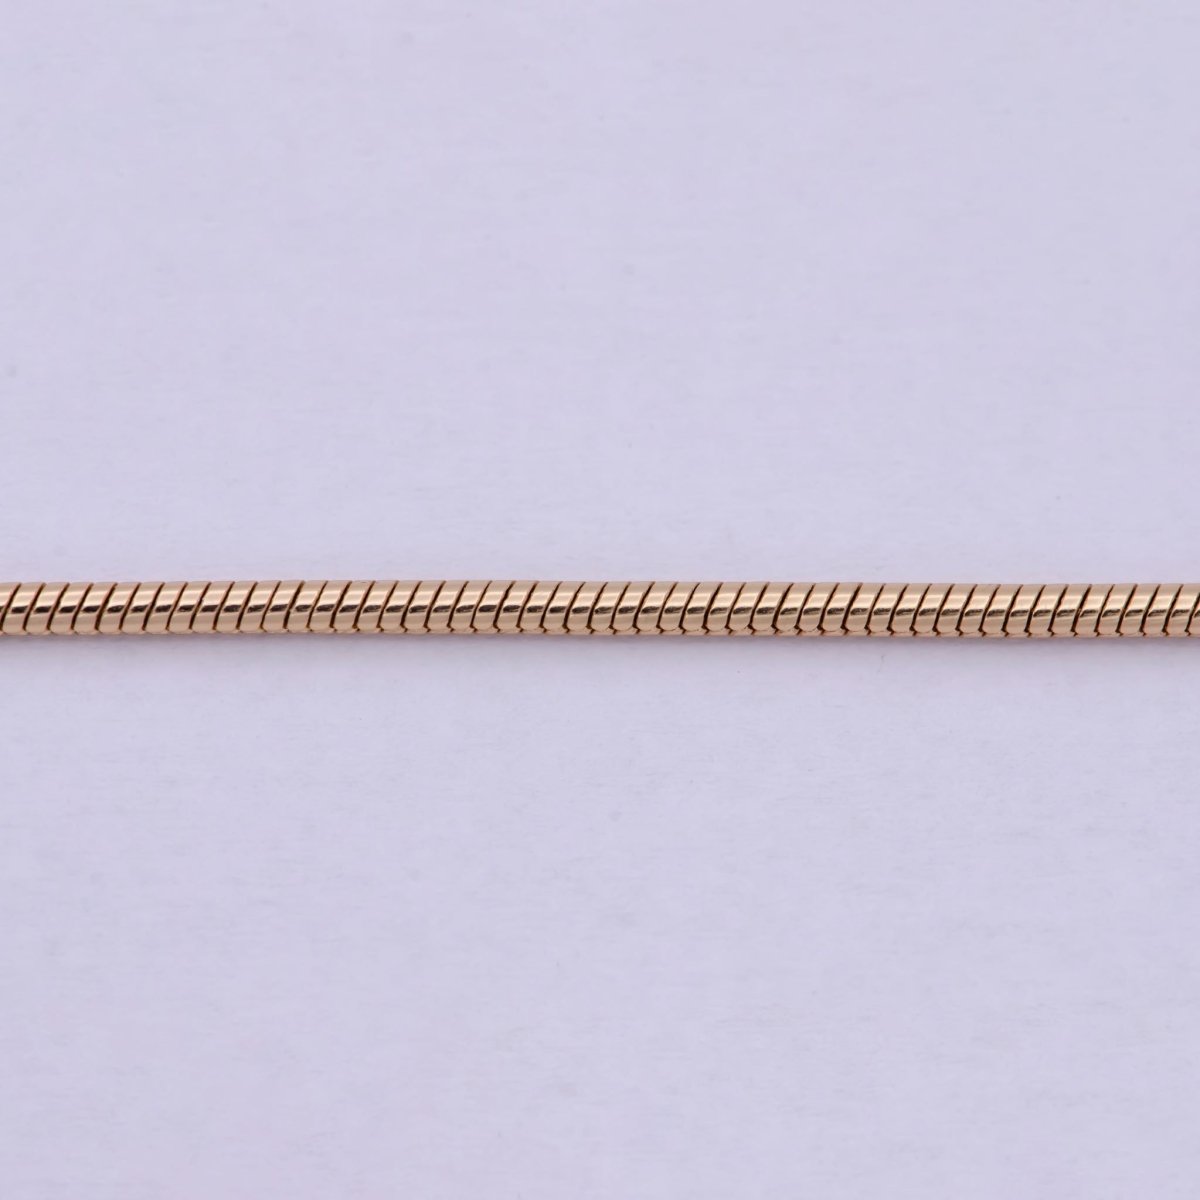 Rose Gold Round Snake Chain Omega Necklace, 18K Gold Filled 1.8mm Width Finished Chain, Layering 19.7 Inch Omega Necklace with Lobster Clasps | WA-618 Clearance Pricing - DLUXCA